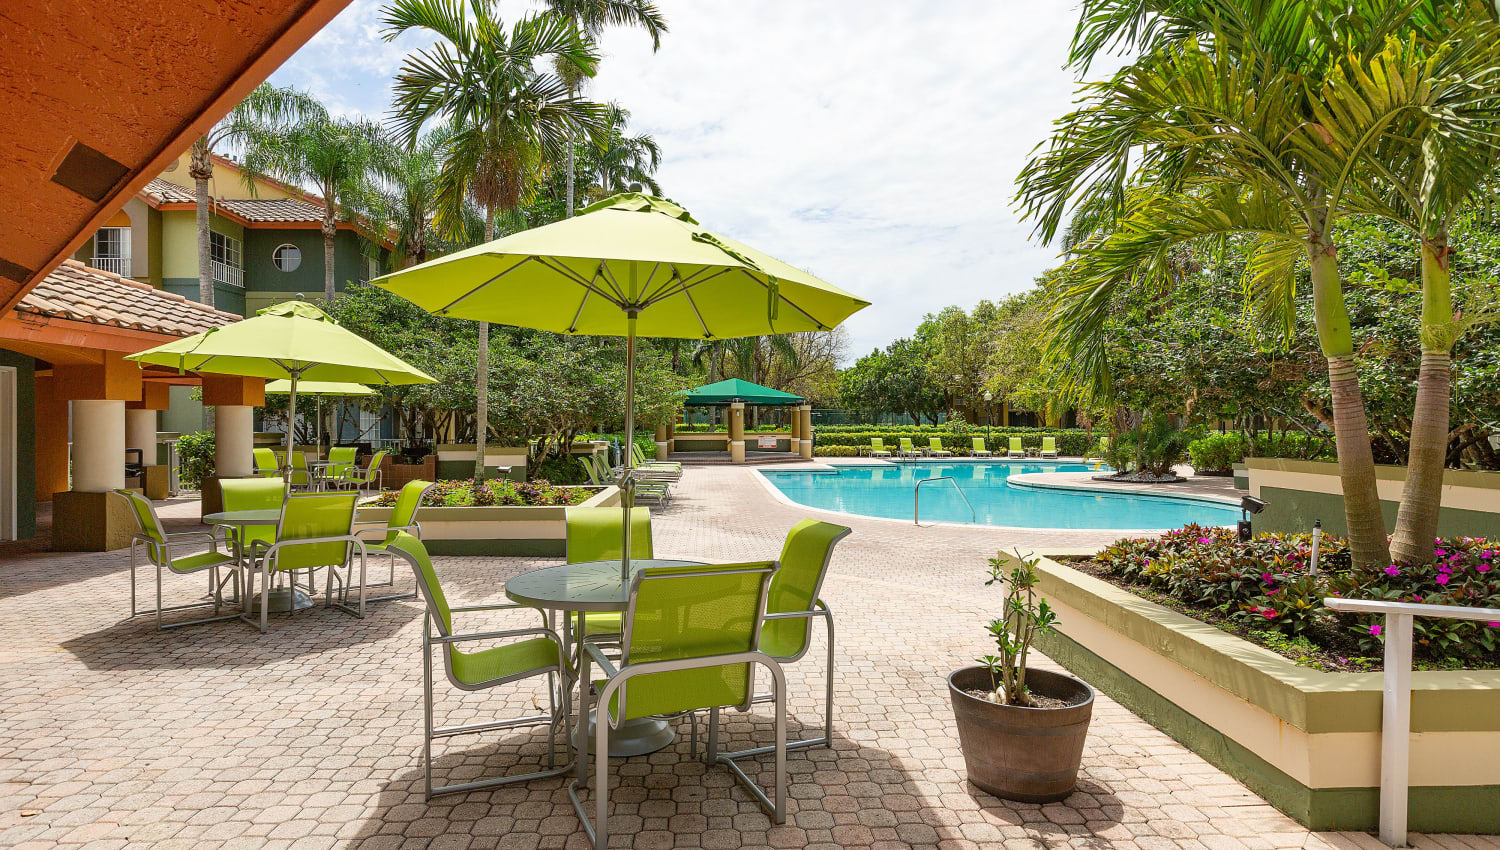 Shaded seating by the pool at Mosaic Apartments in Coral Springs, Florida